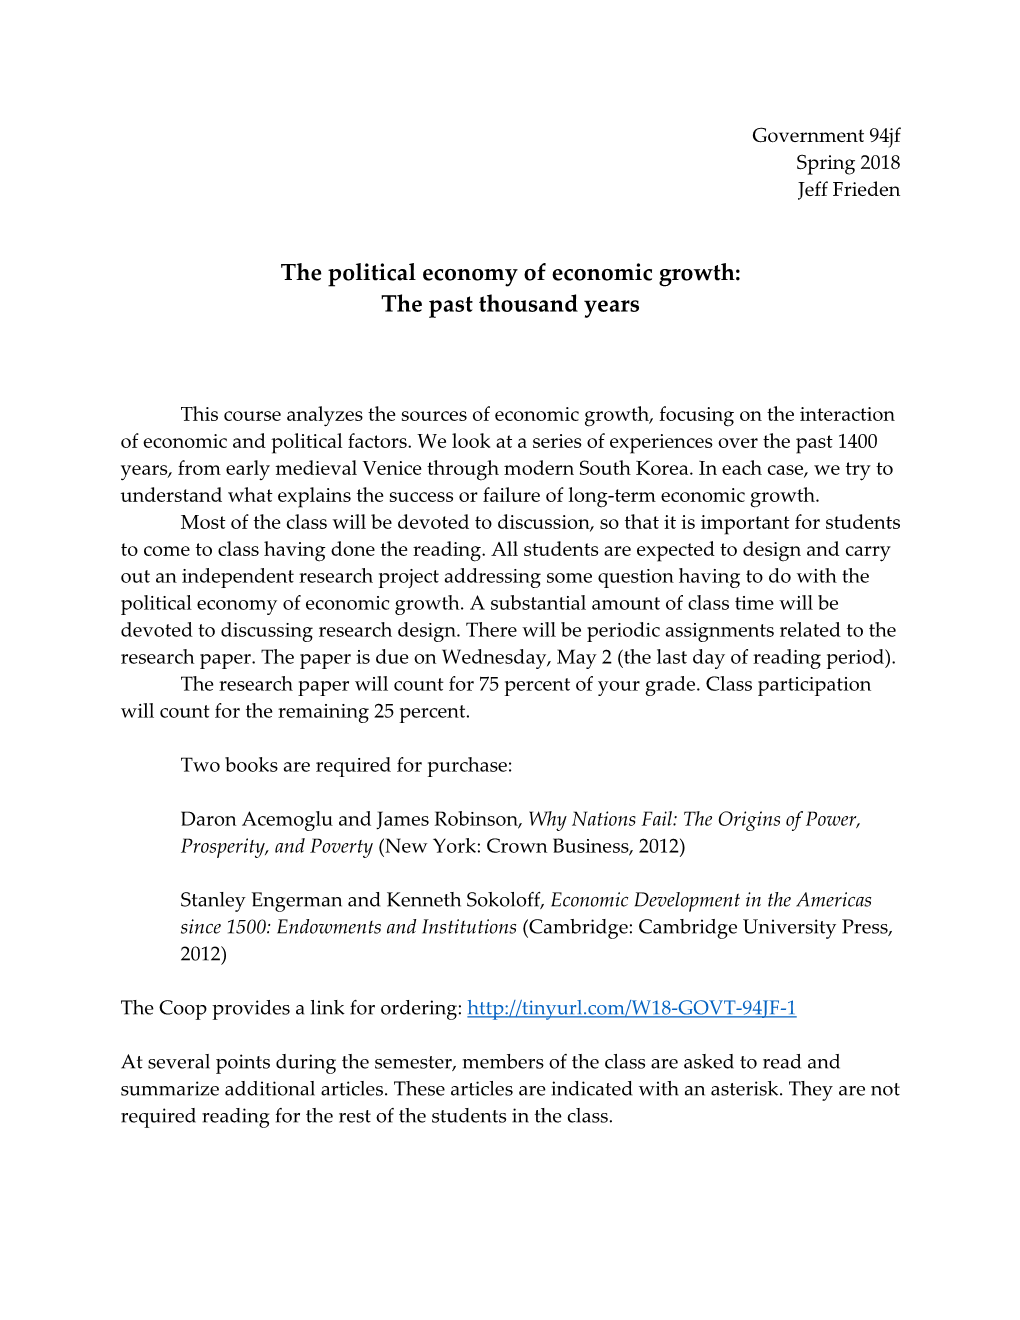 The Political Economy of Economic Growth: the Past Thousand Years